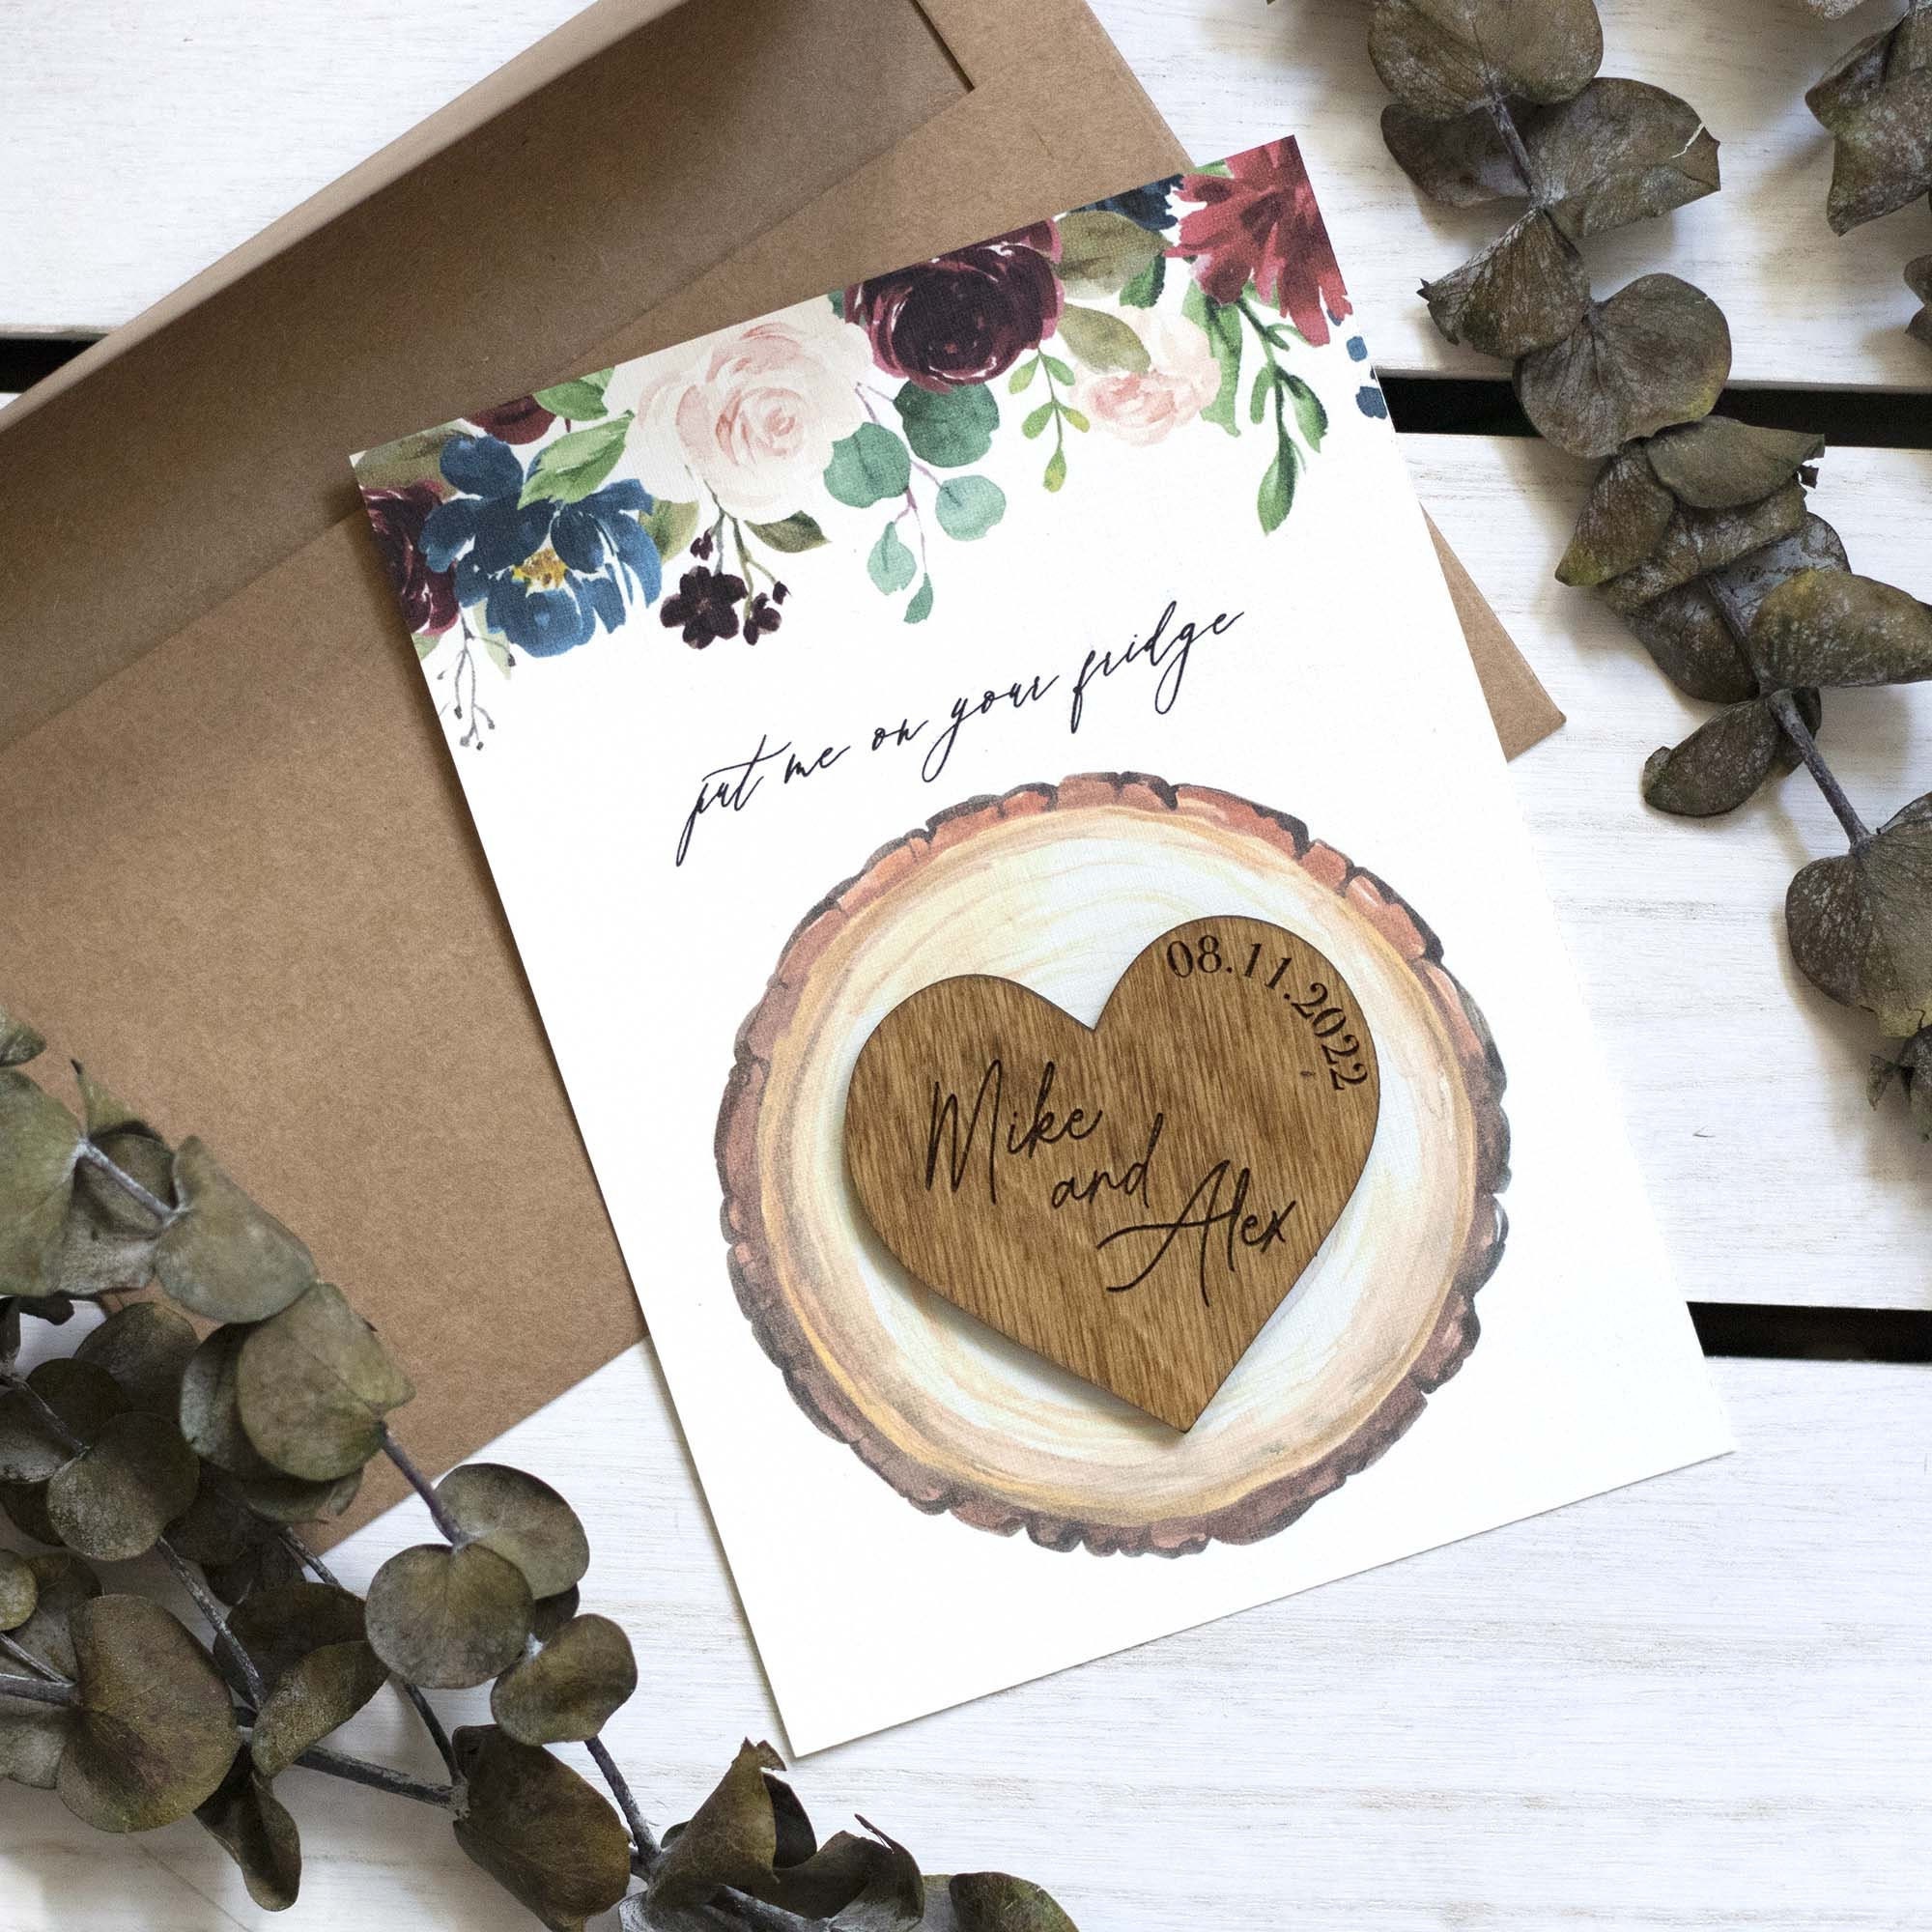 Moody Floral Heart Save the Date Magnet Card Personalized Engraved Wood Magnet on Linen Cardstock